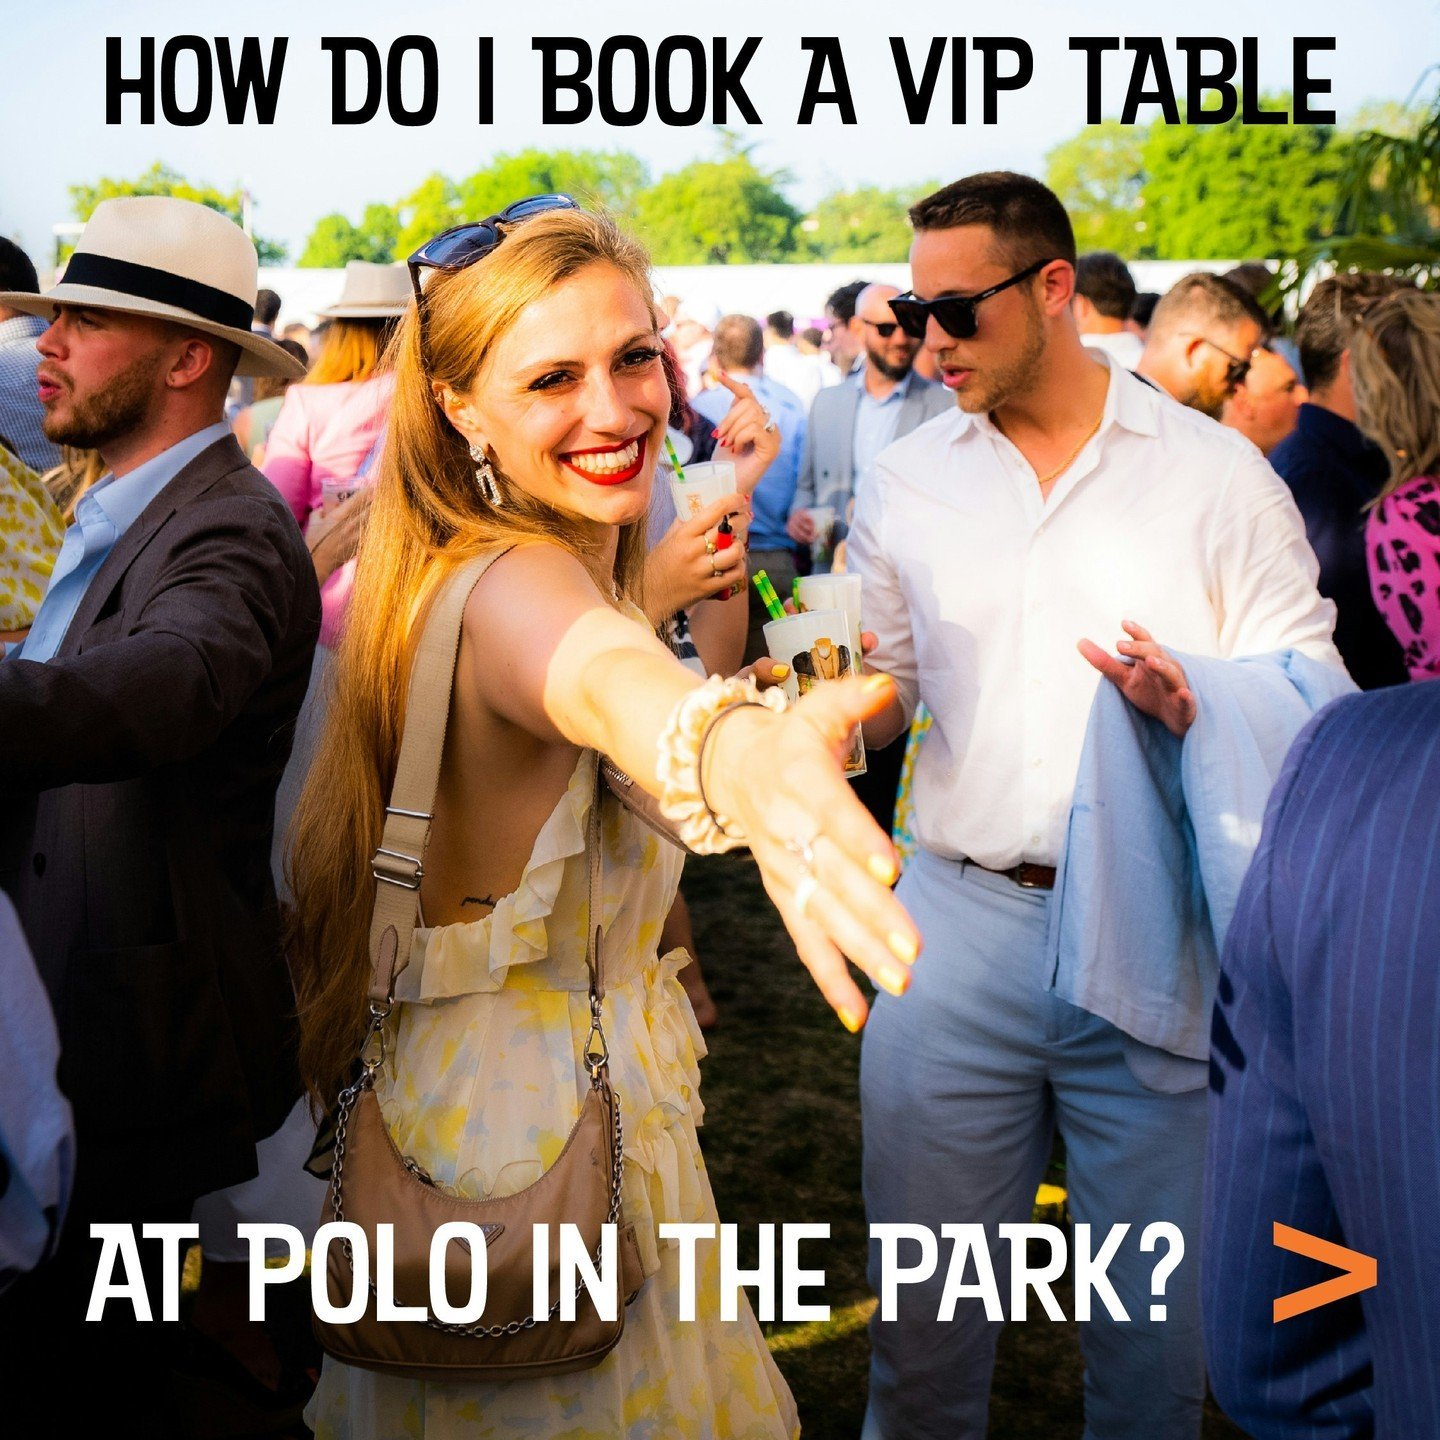 👉 email our team at polointhepark@mahiki.com to secure your VIP spot for @polointhepark 🏇 

(Please note this doesn&rsquo;t include a general admission ticket to Polo in the Park, customers need to purchase their GA ticket separately) 

#mahikilond